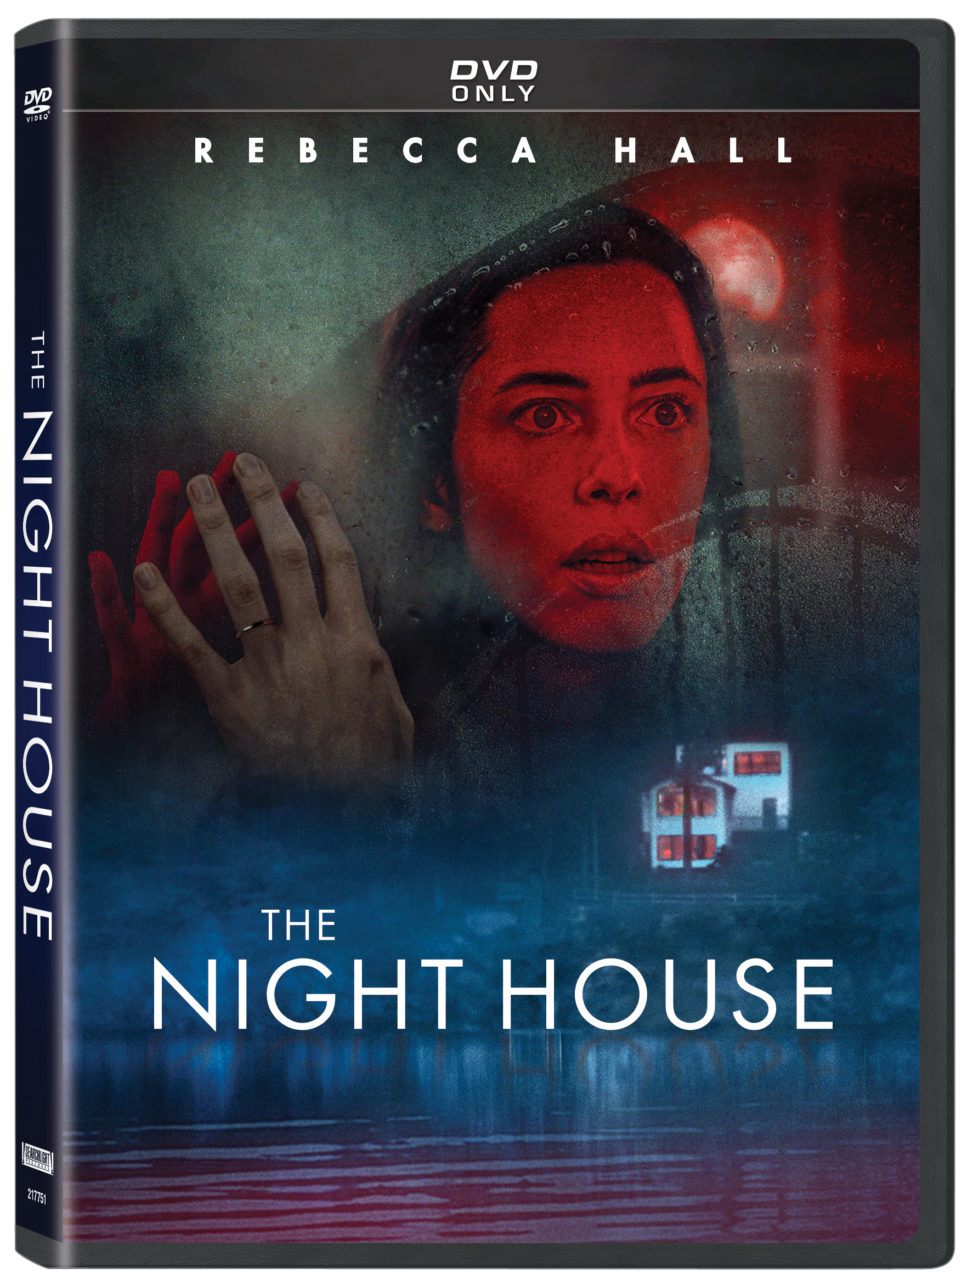 The Night House DVD cover (Searchlight Pictures/Disney Media & Entertainment Distribution)